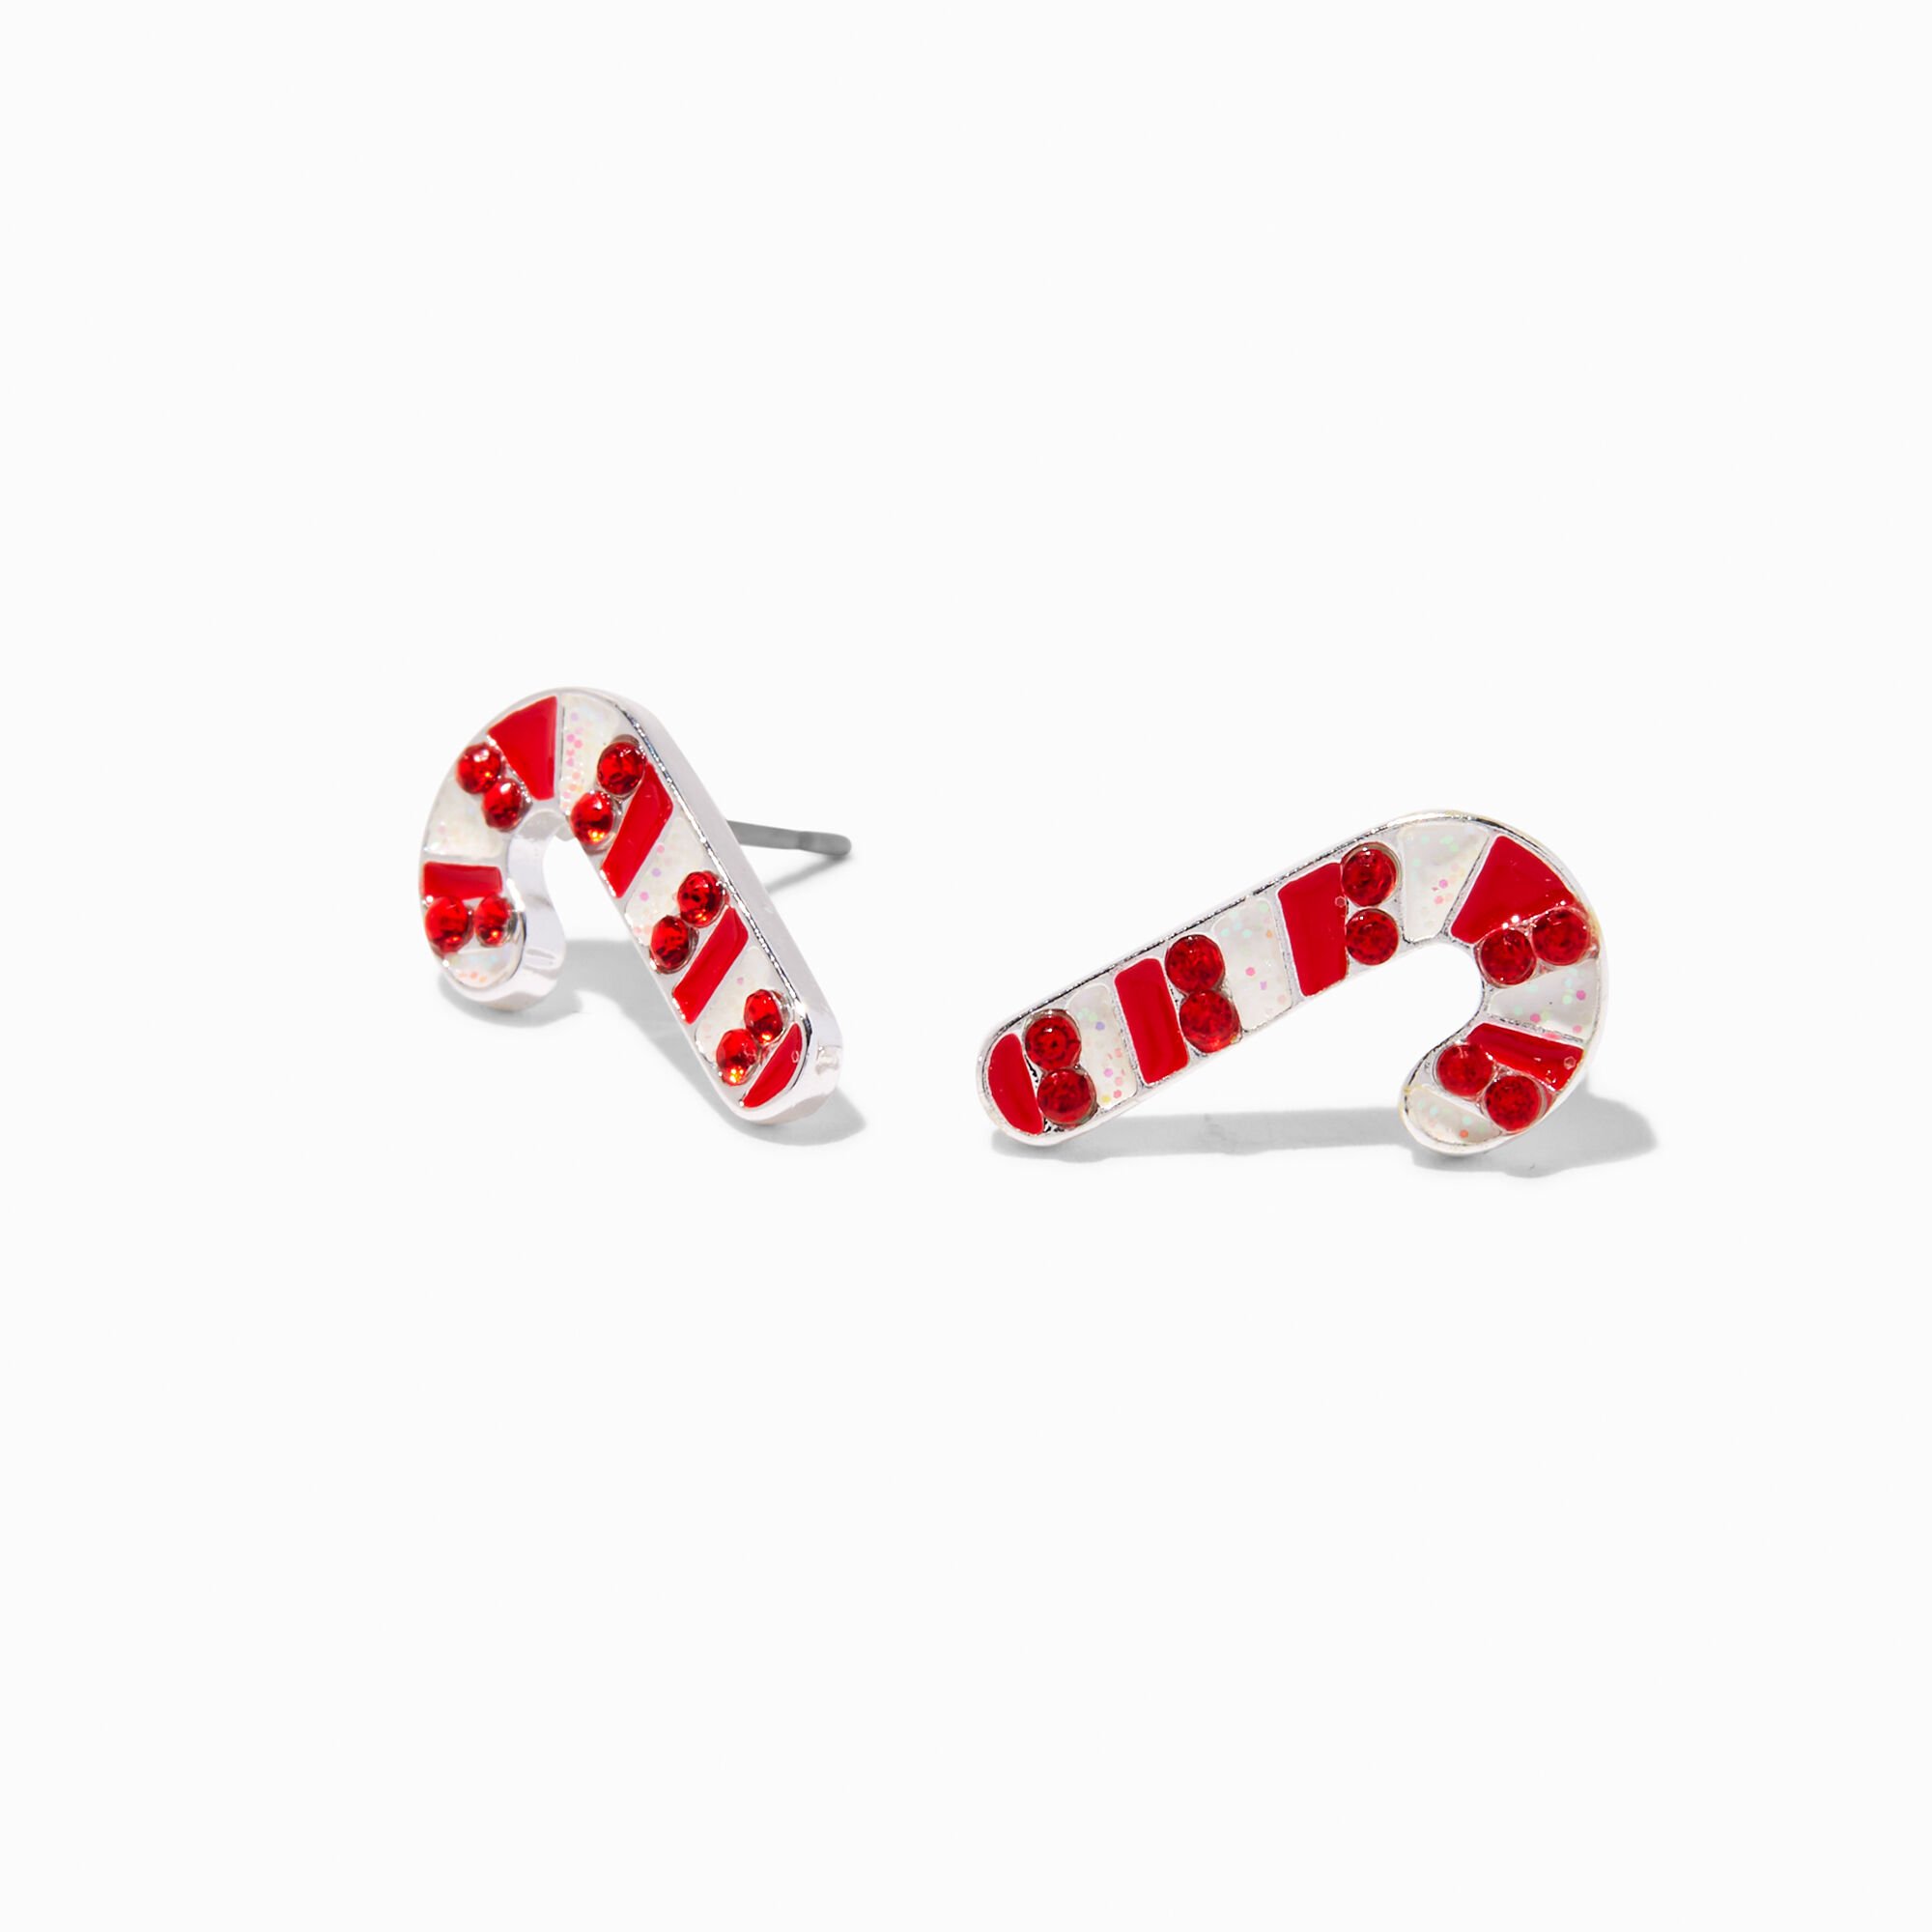 View Claires Crystal Candy Cane Stud Earrings Red information